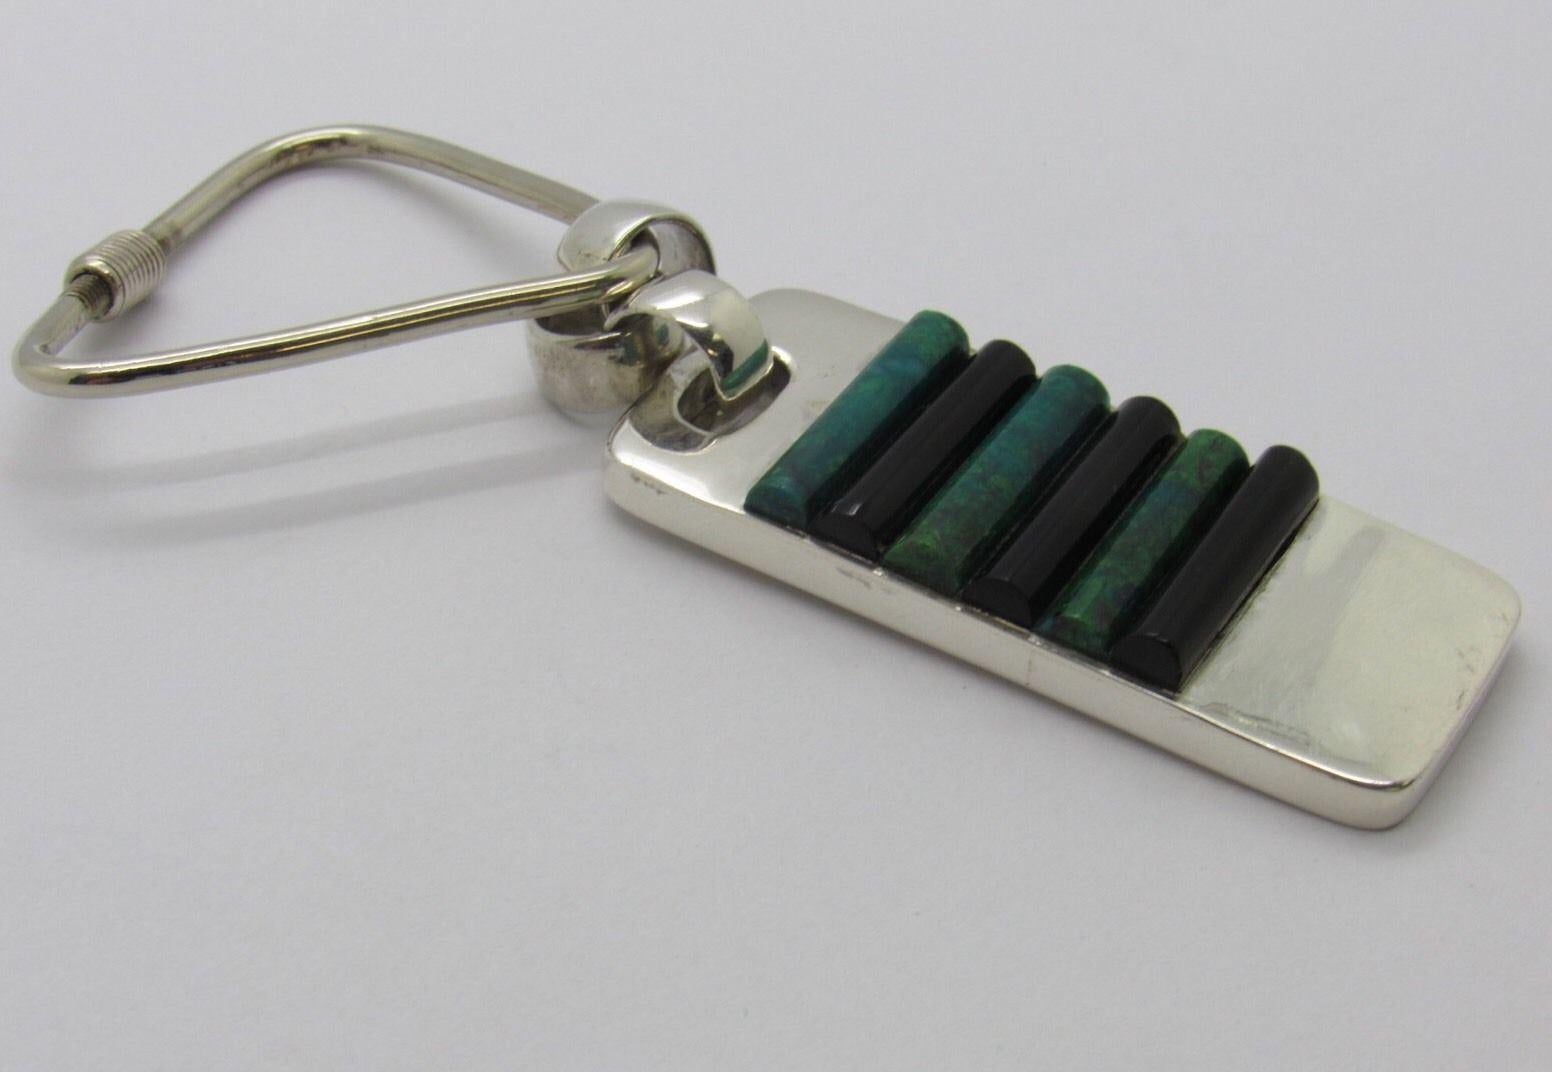 Taxco Mexico J. Gomes Sterling Silver Onyx and Green Turquoise Keychain 1